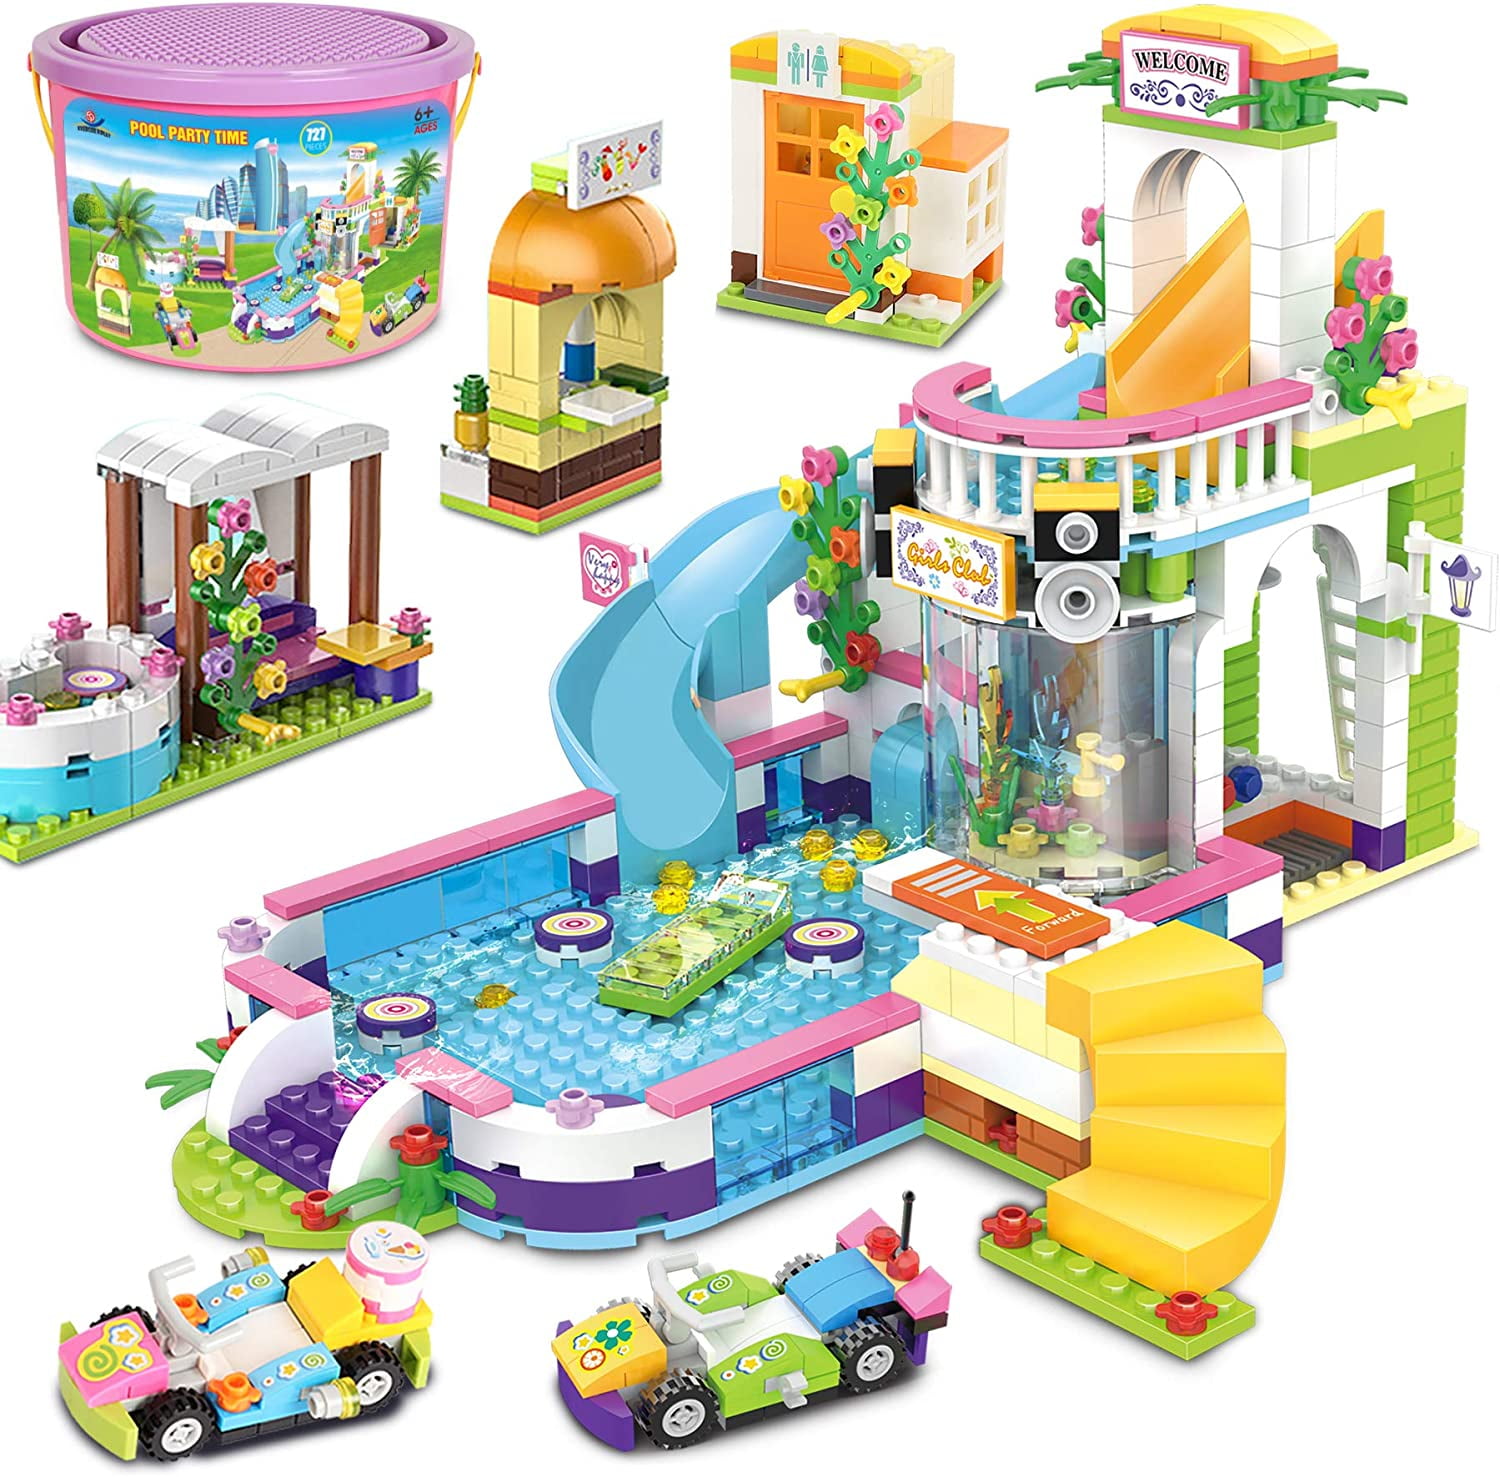 Friends Summer Pool Party Pool Building Set for Girls 6-12, 727 PCS Swimming Pool Creative Building Bricks Blocks Kit with Toy Juice Bar and Hot Tub, Roleplay Gift Party Toy for